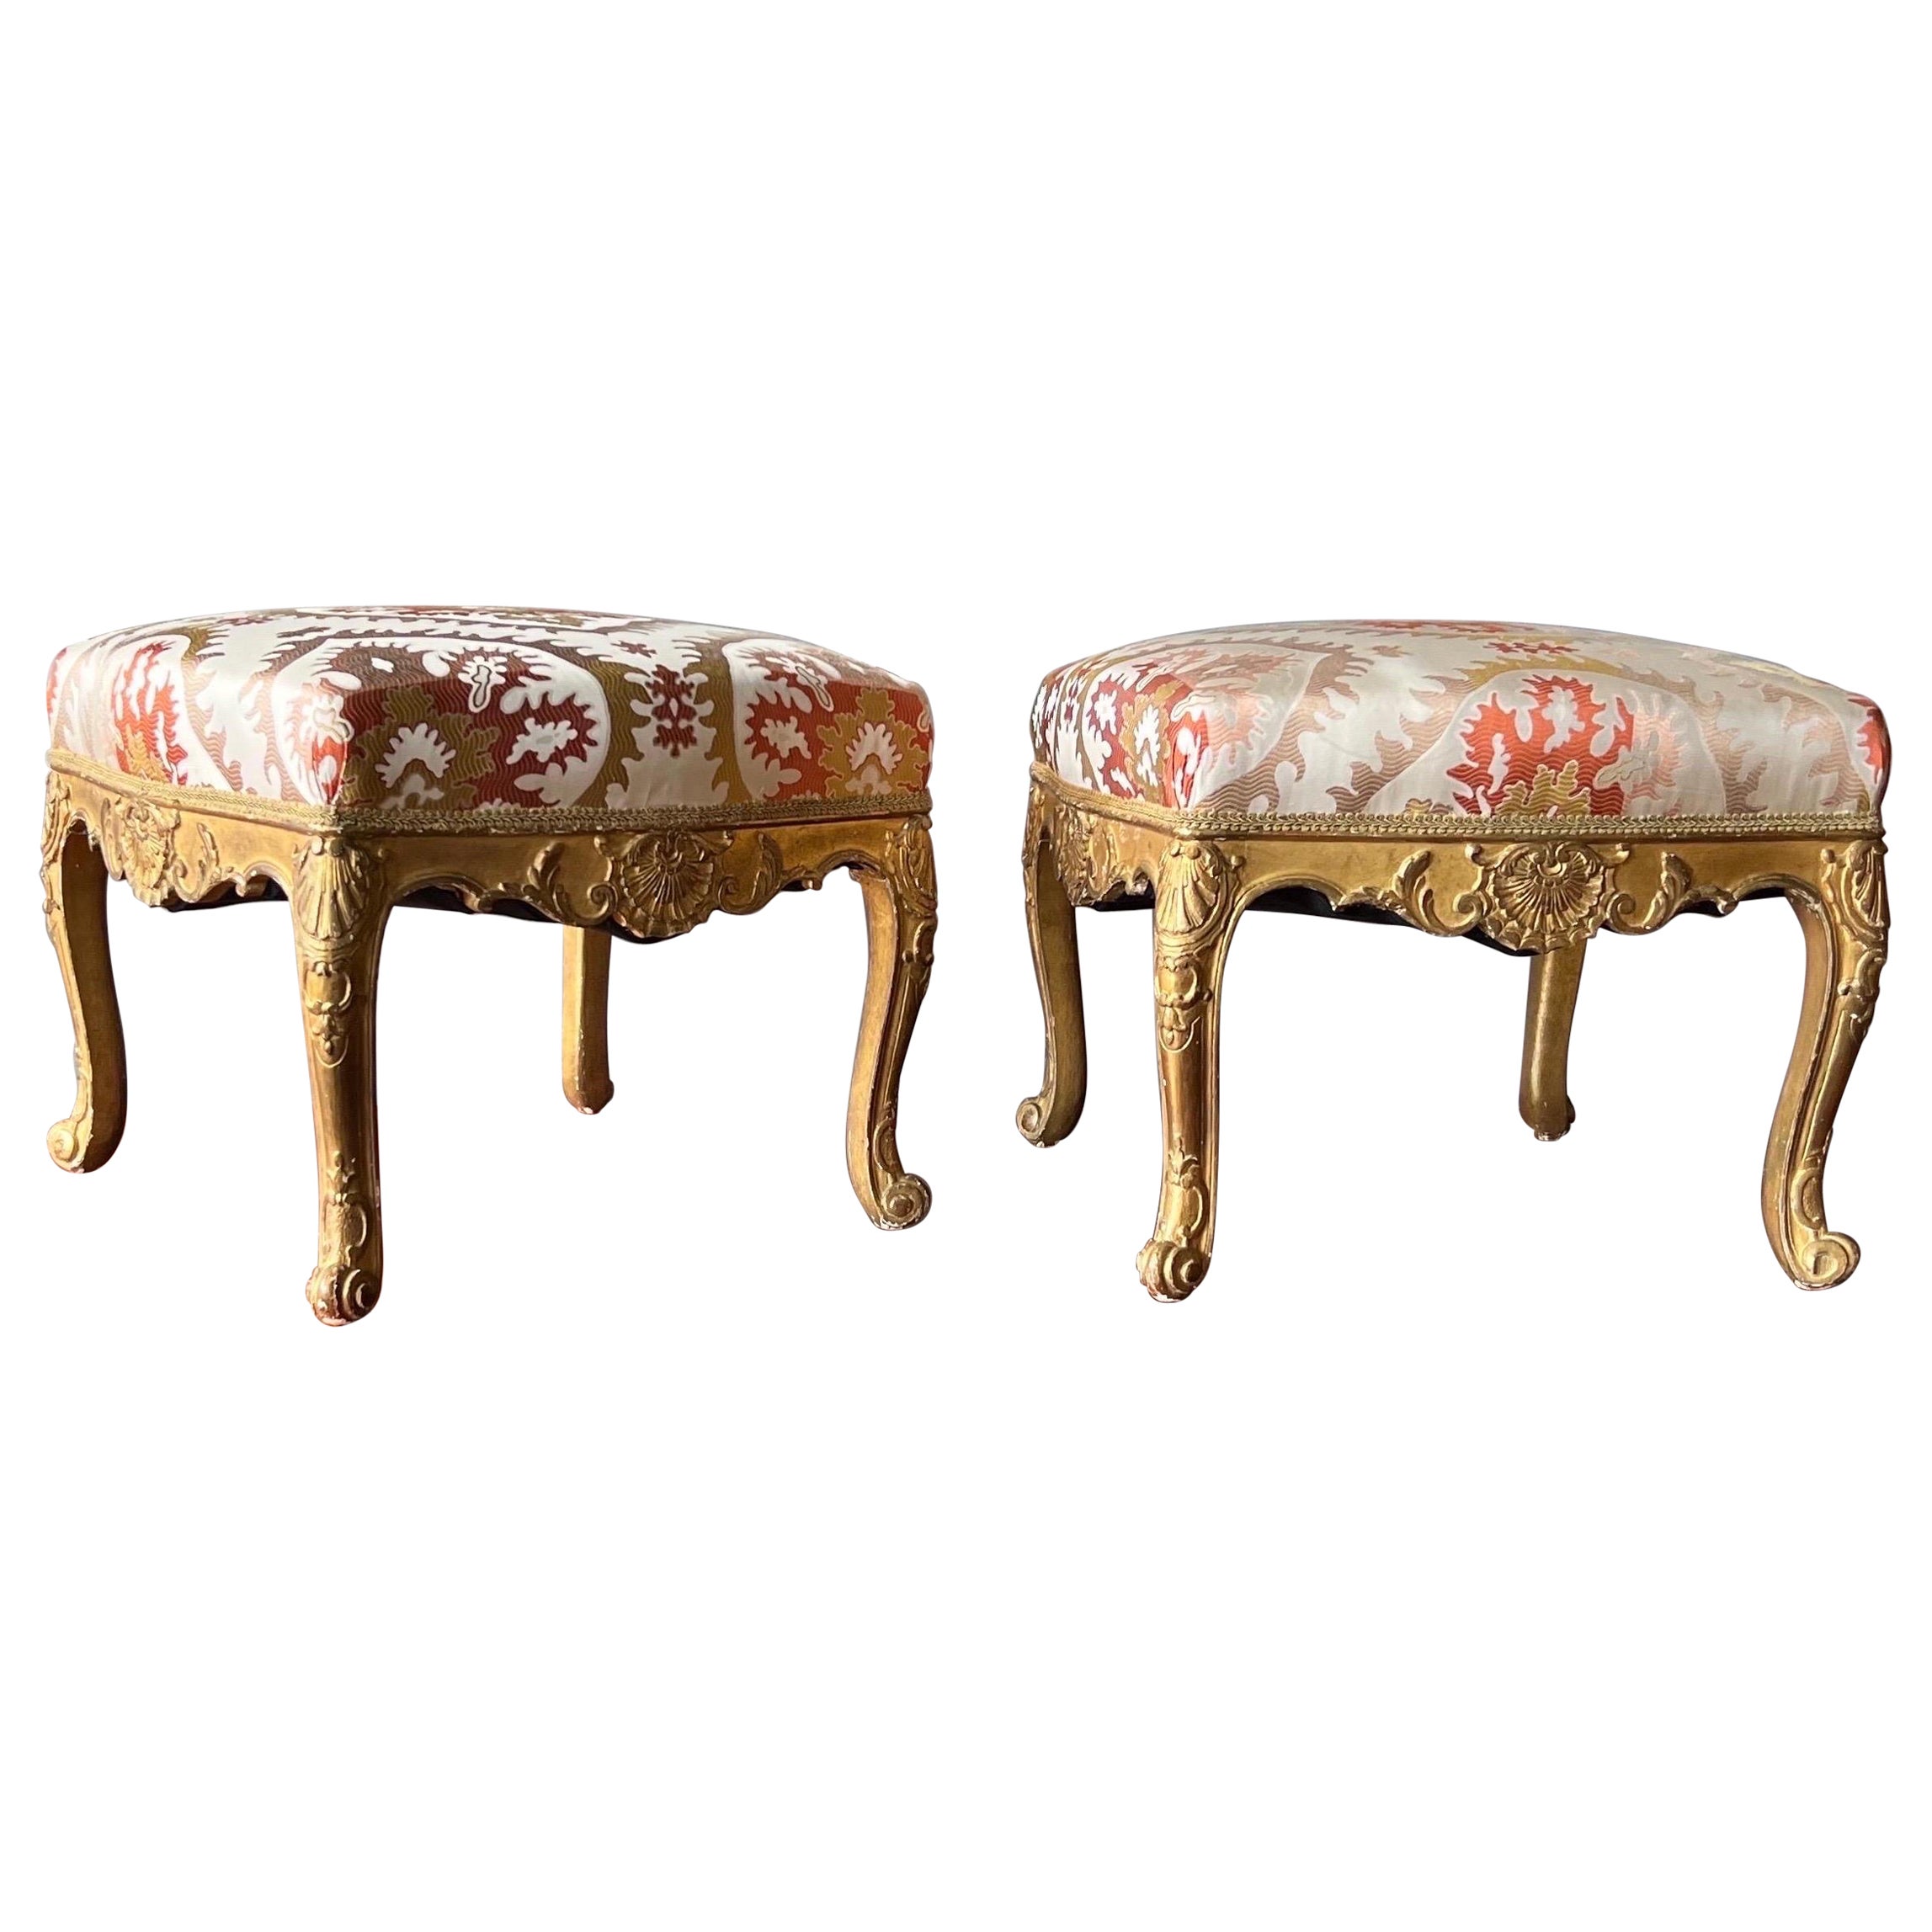 Fantastic Pair of 18th-19th Century Gold Gilt French Stools For Sale